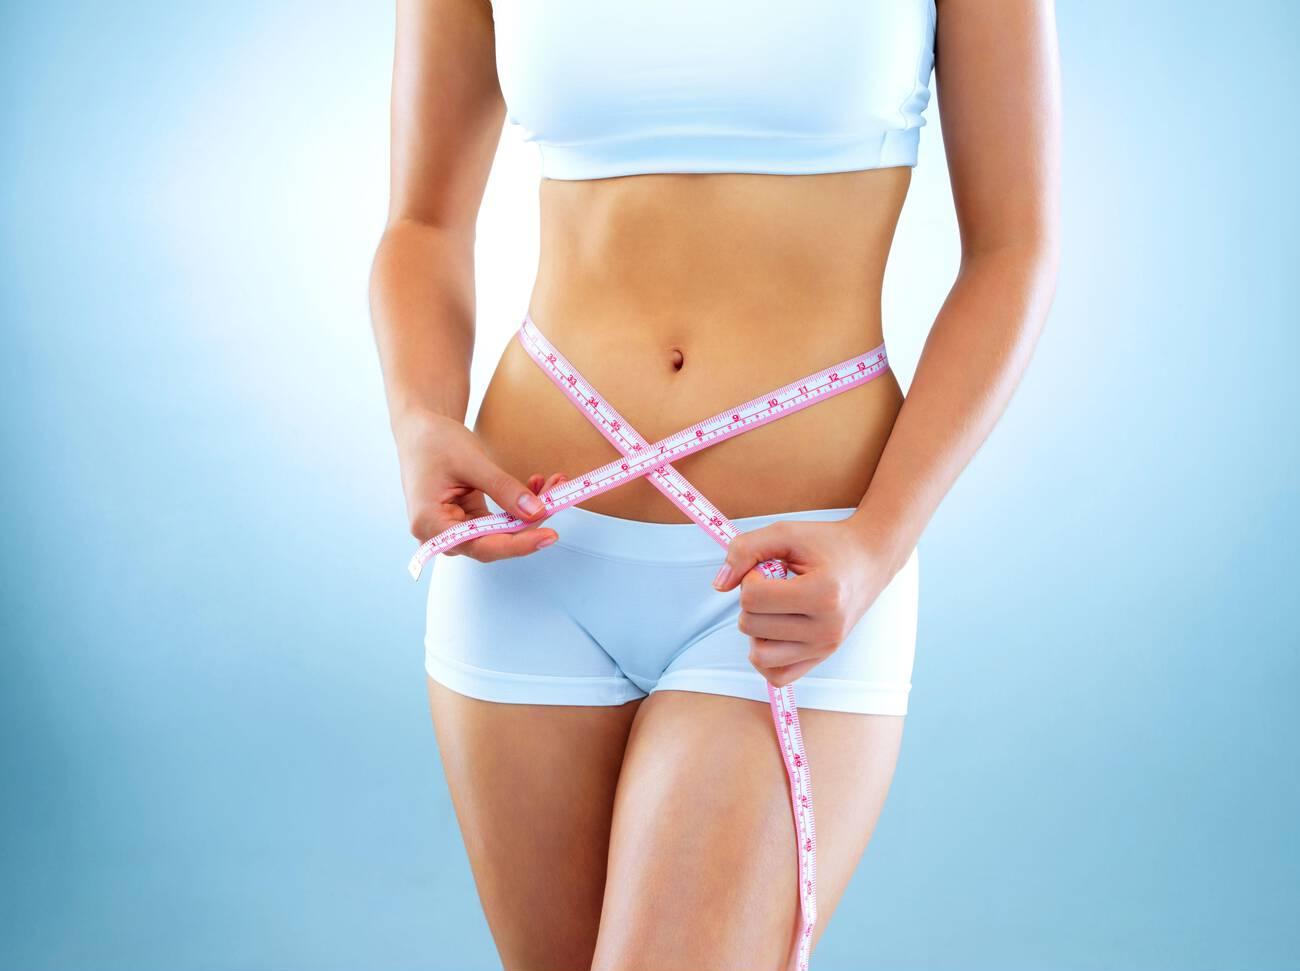 Weight loss for women over 40